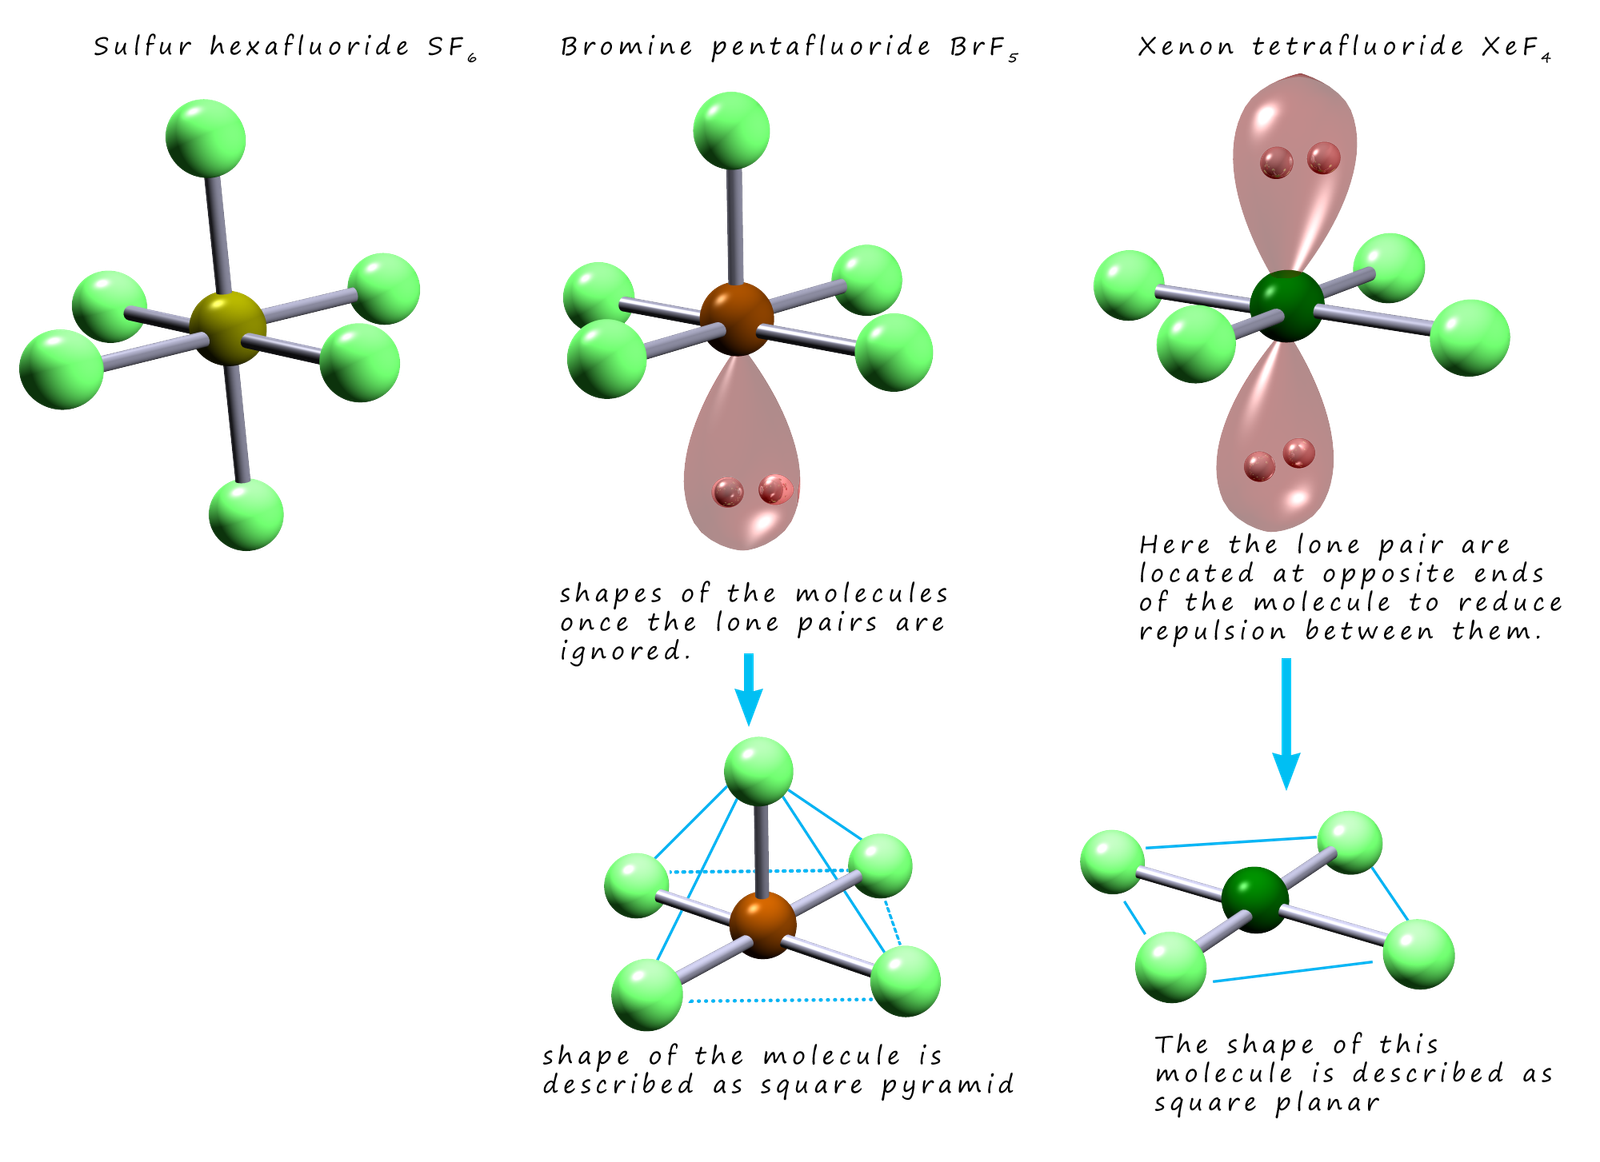 3d models showing the shapes of octahedral molecules with lone pairs or non-bonding pairs of electrons present.